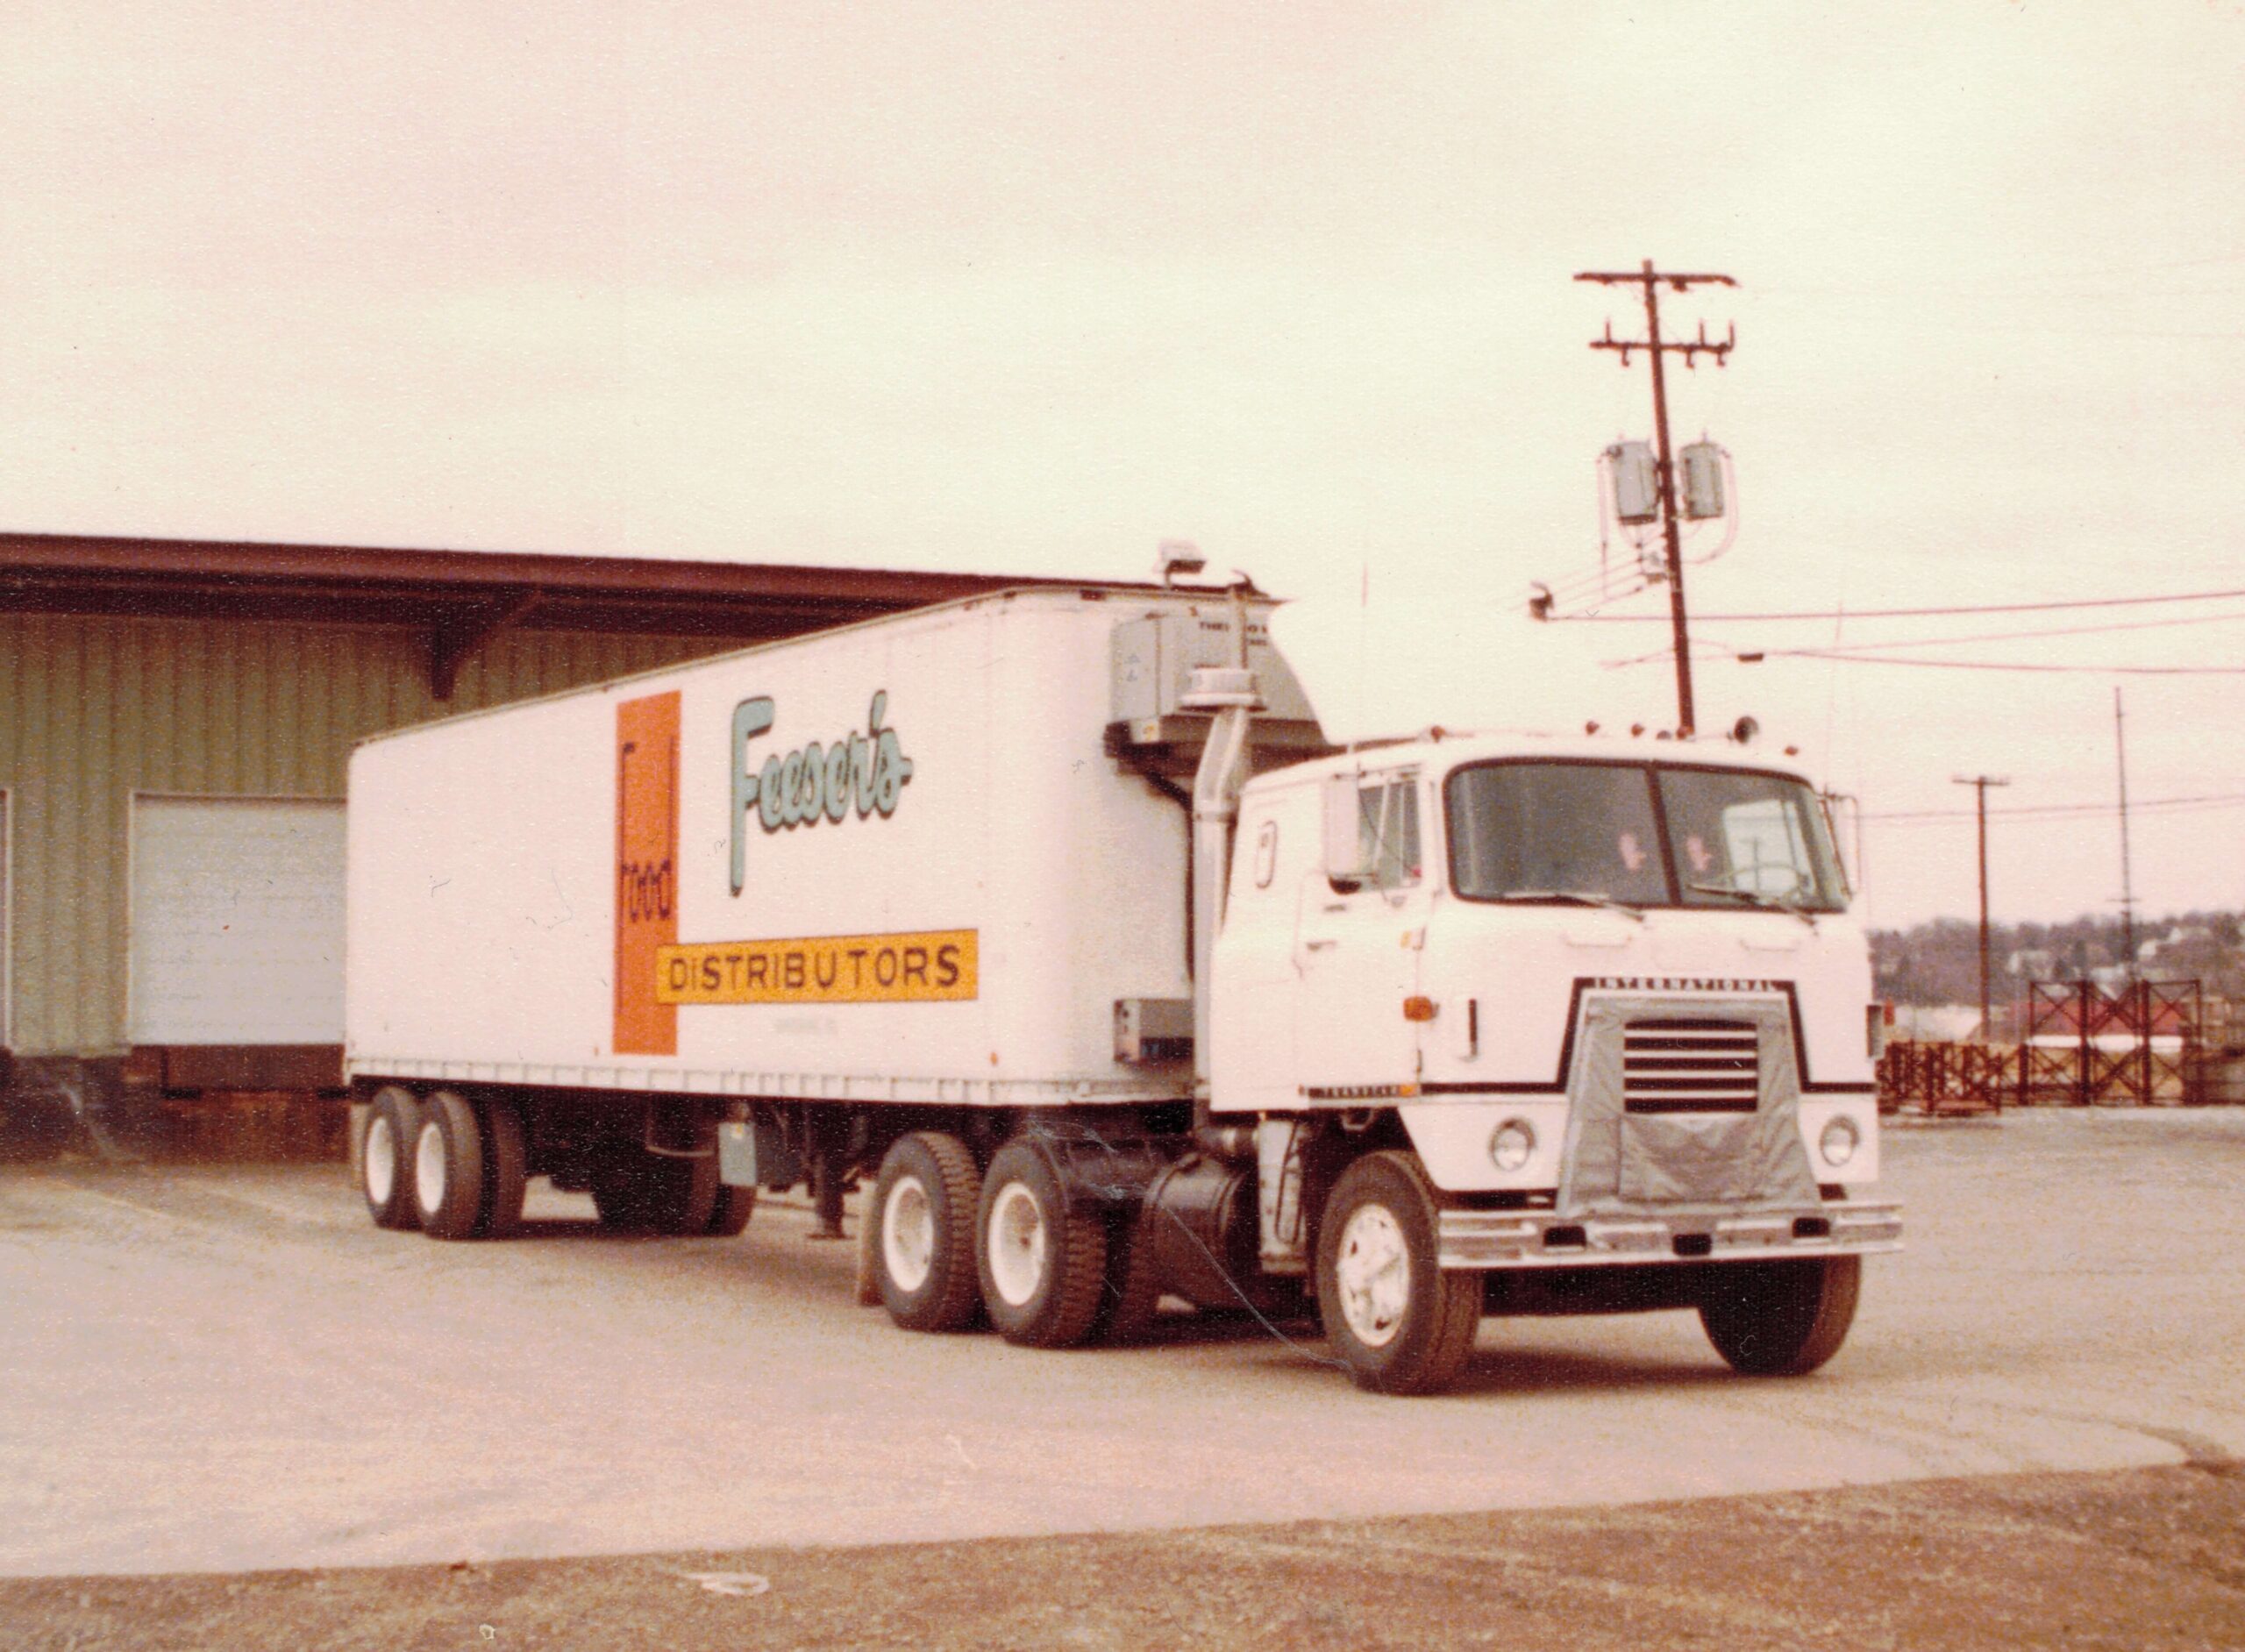 an old school white delivery truck with the Feeser's logo on it